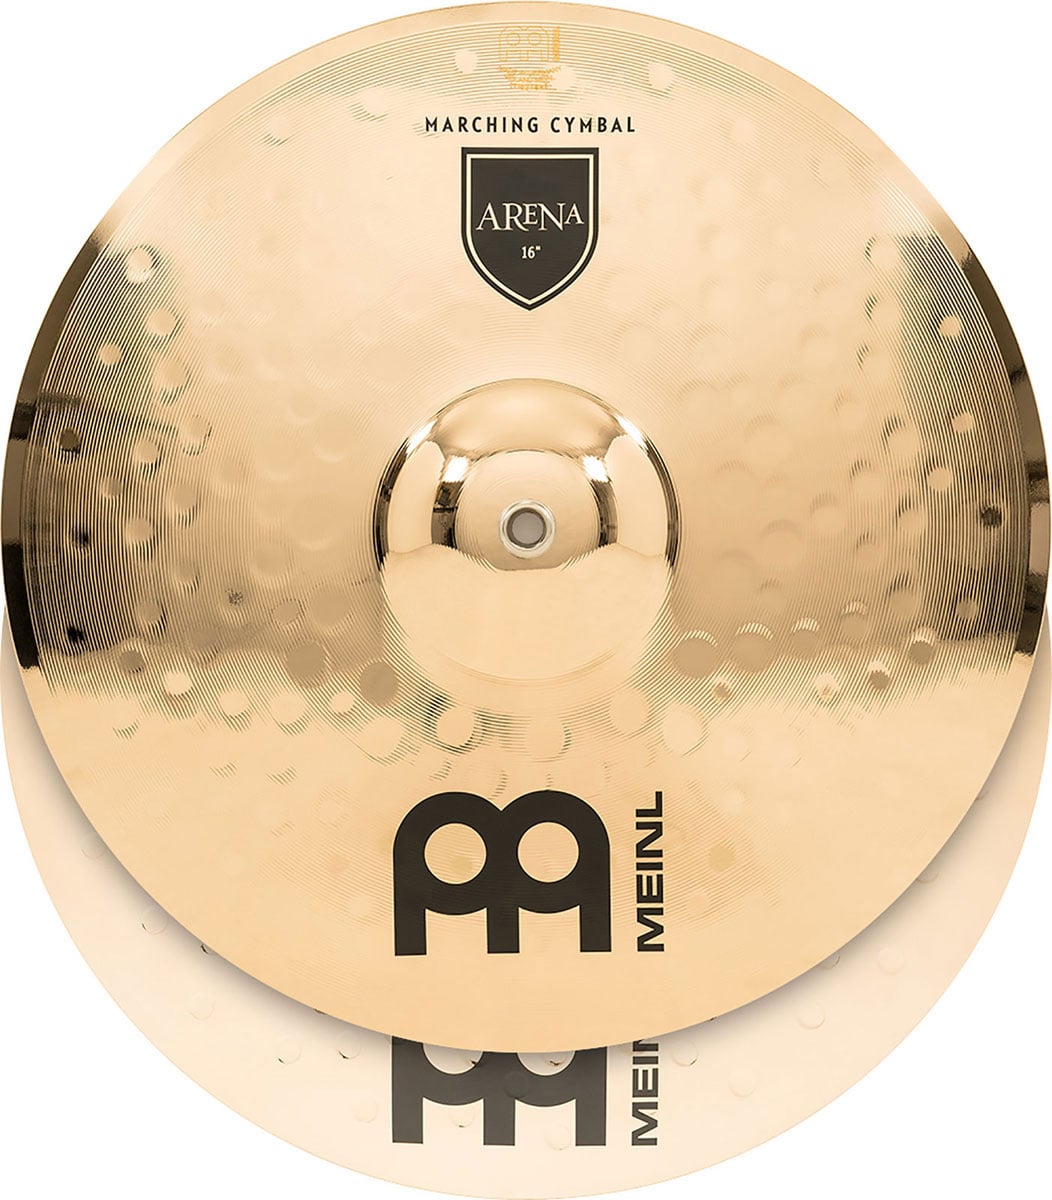 MEINL MA-AR-16 - PAIRE CYMBALES MARCHING ARENA 16